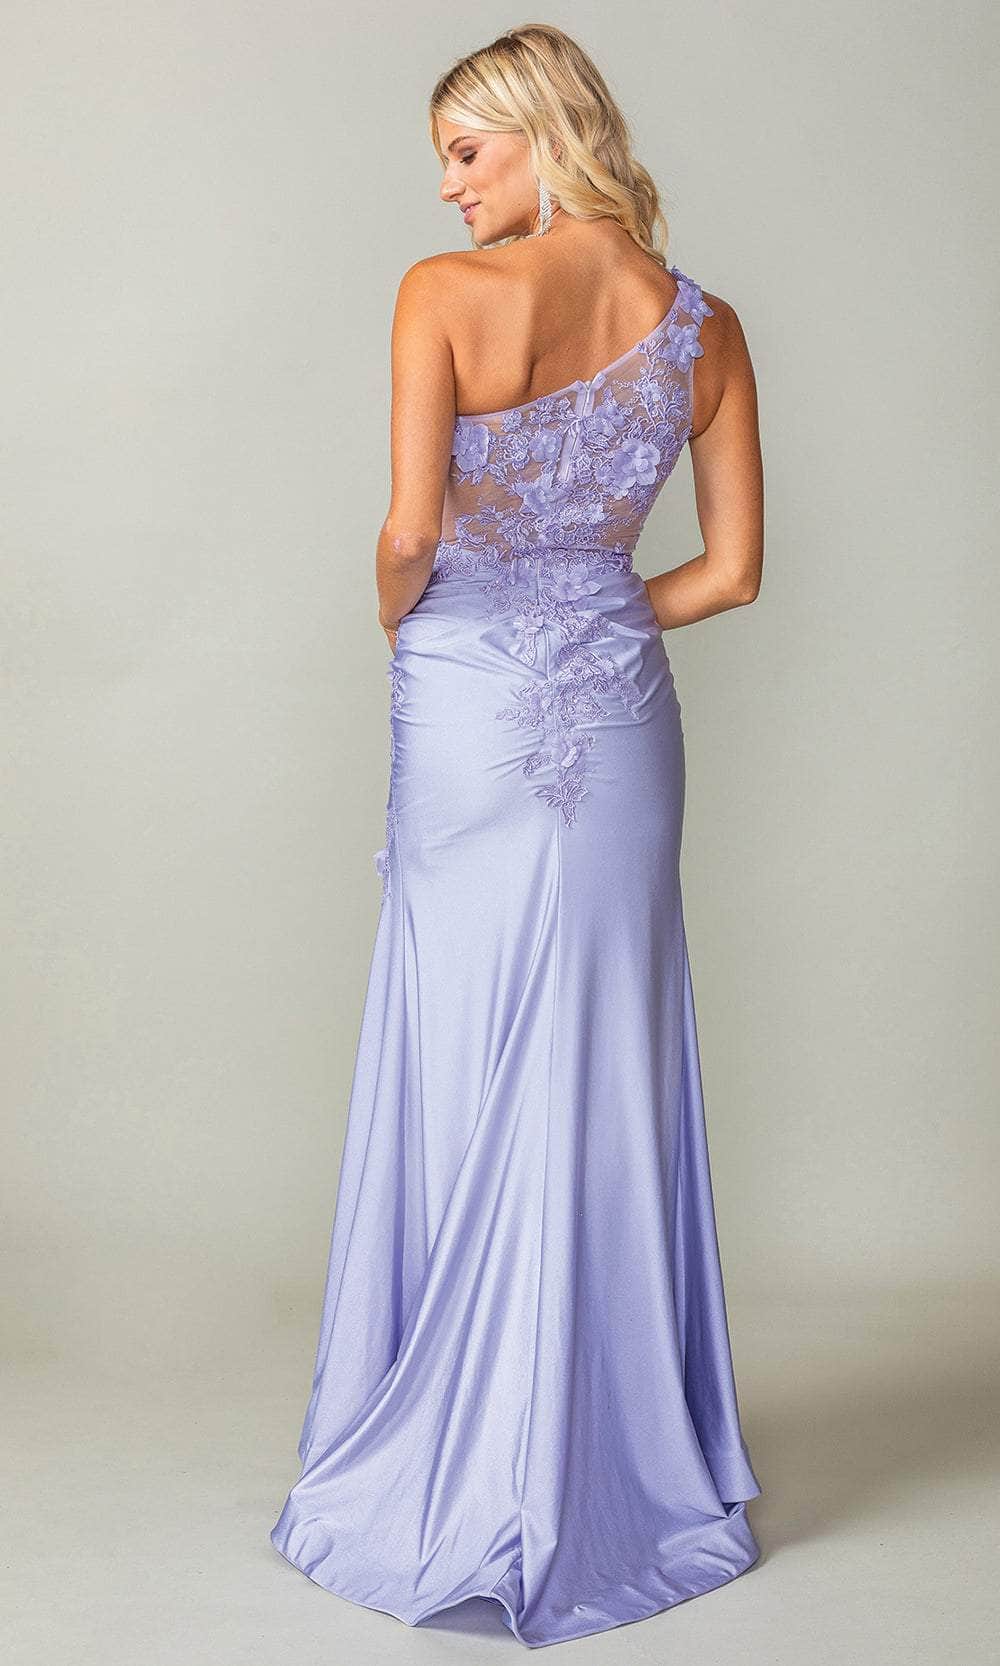 Dancing Queen 4381 - Asymmetric Embroidered Prom Gown Prom Dresses 